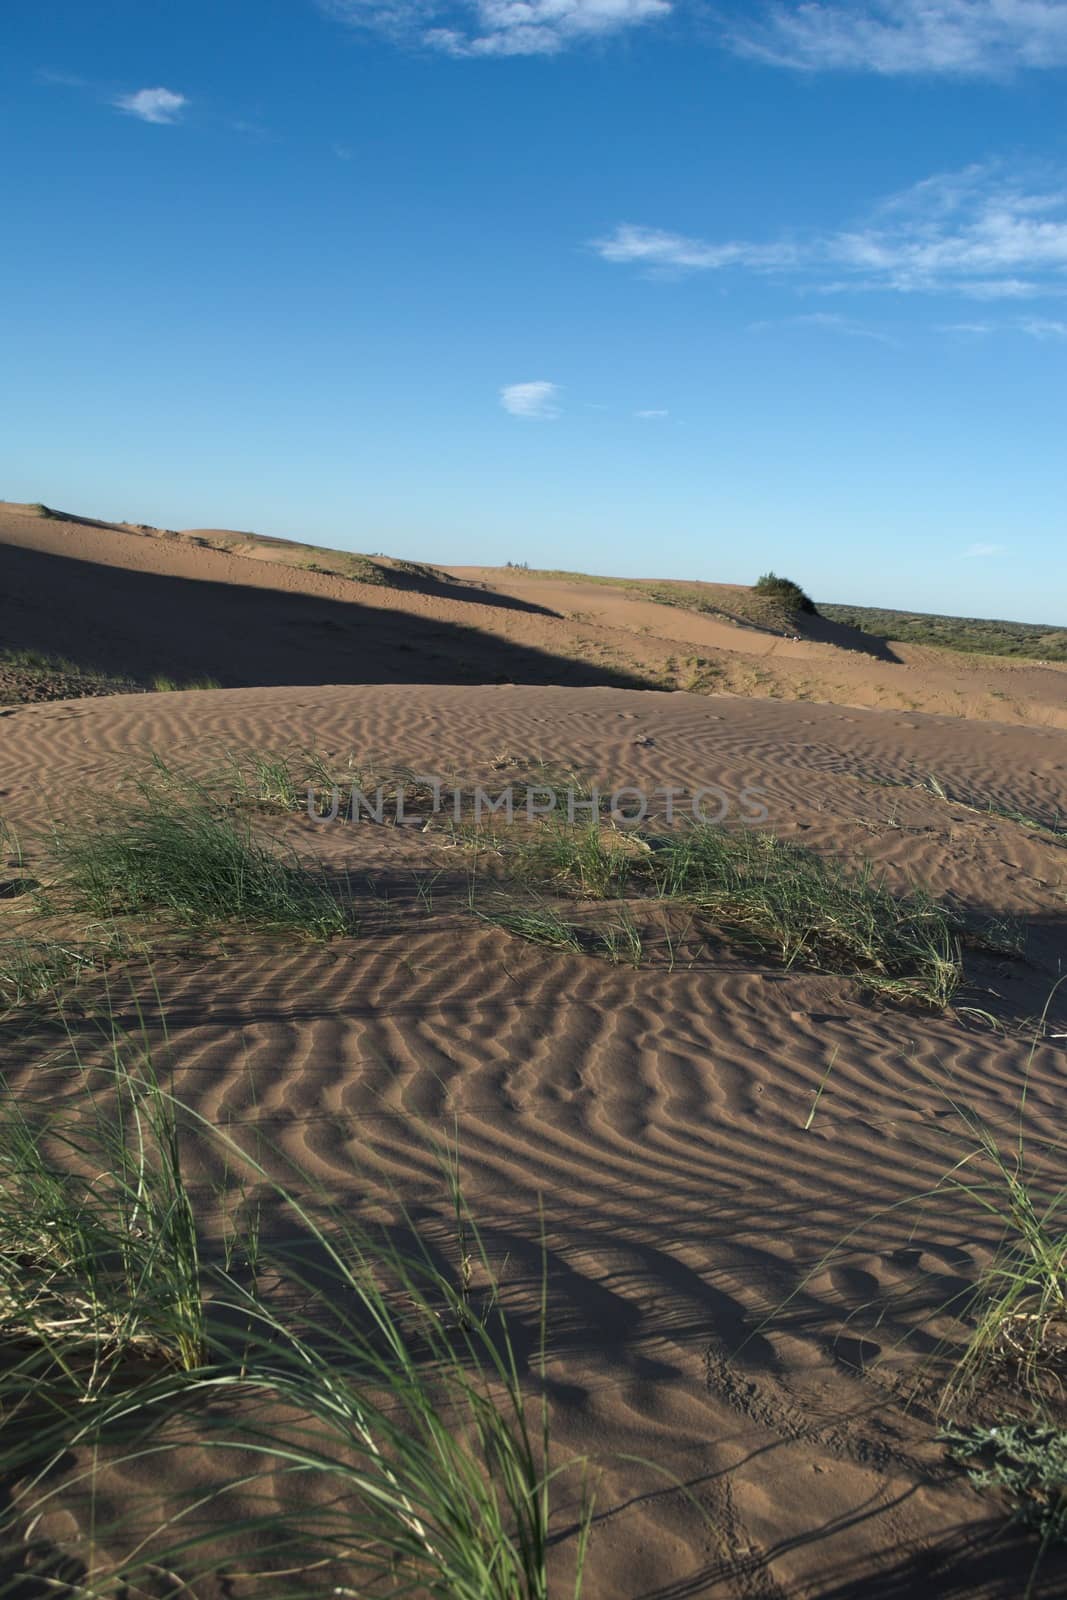 Sand ripples with sparse vegetation under a clear blue sky in the desert of Lavalle, province of Mendoza, Argentina